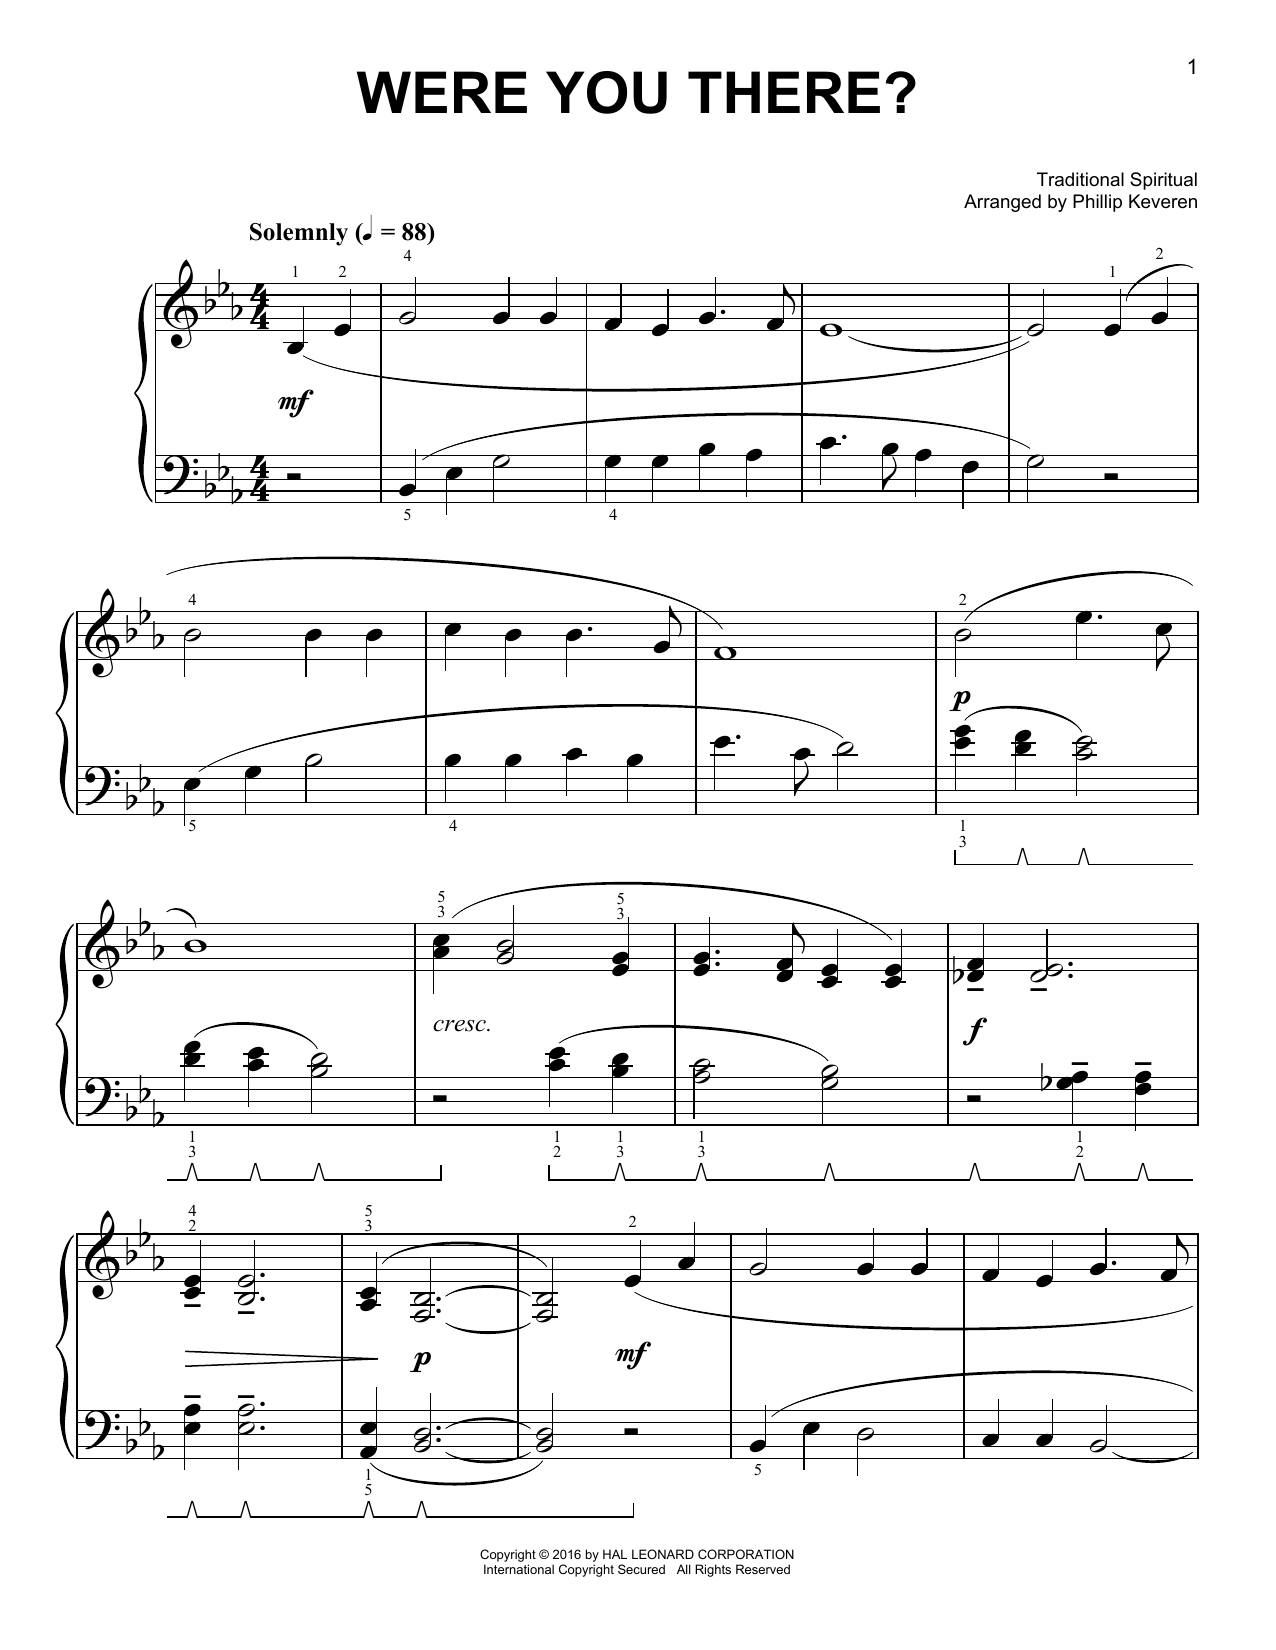 Download Traditional Spiritual Were You There? [Classical version] (ar Sheet Music